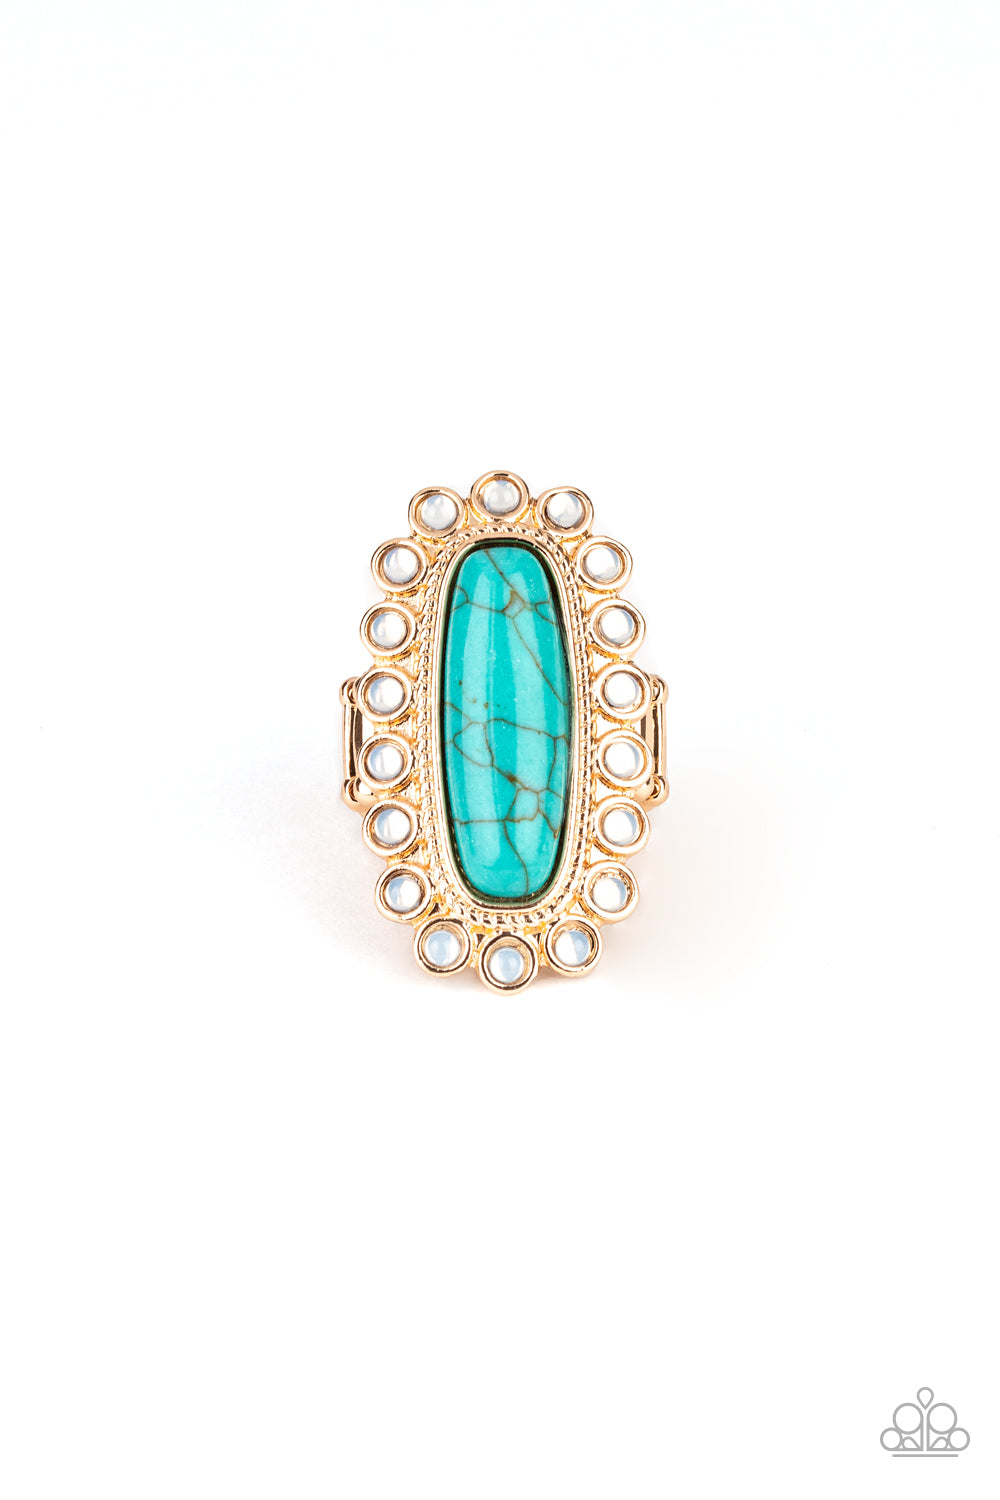 Paparazzi Mystic Oasis - Gold and Turquoise Ring